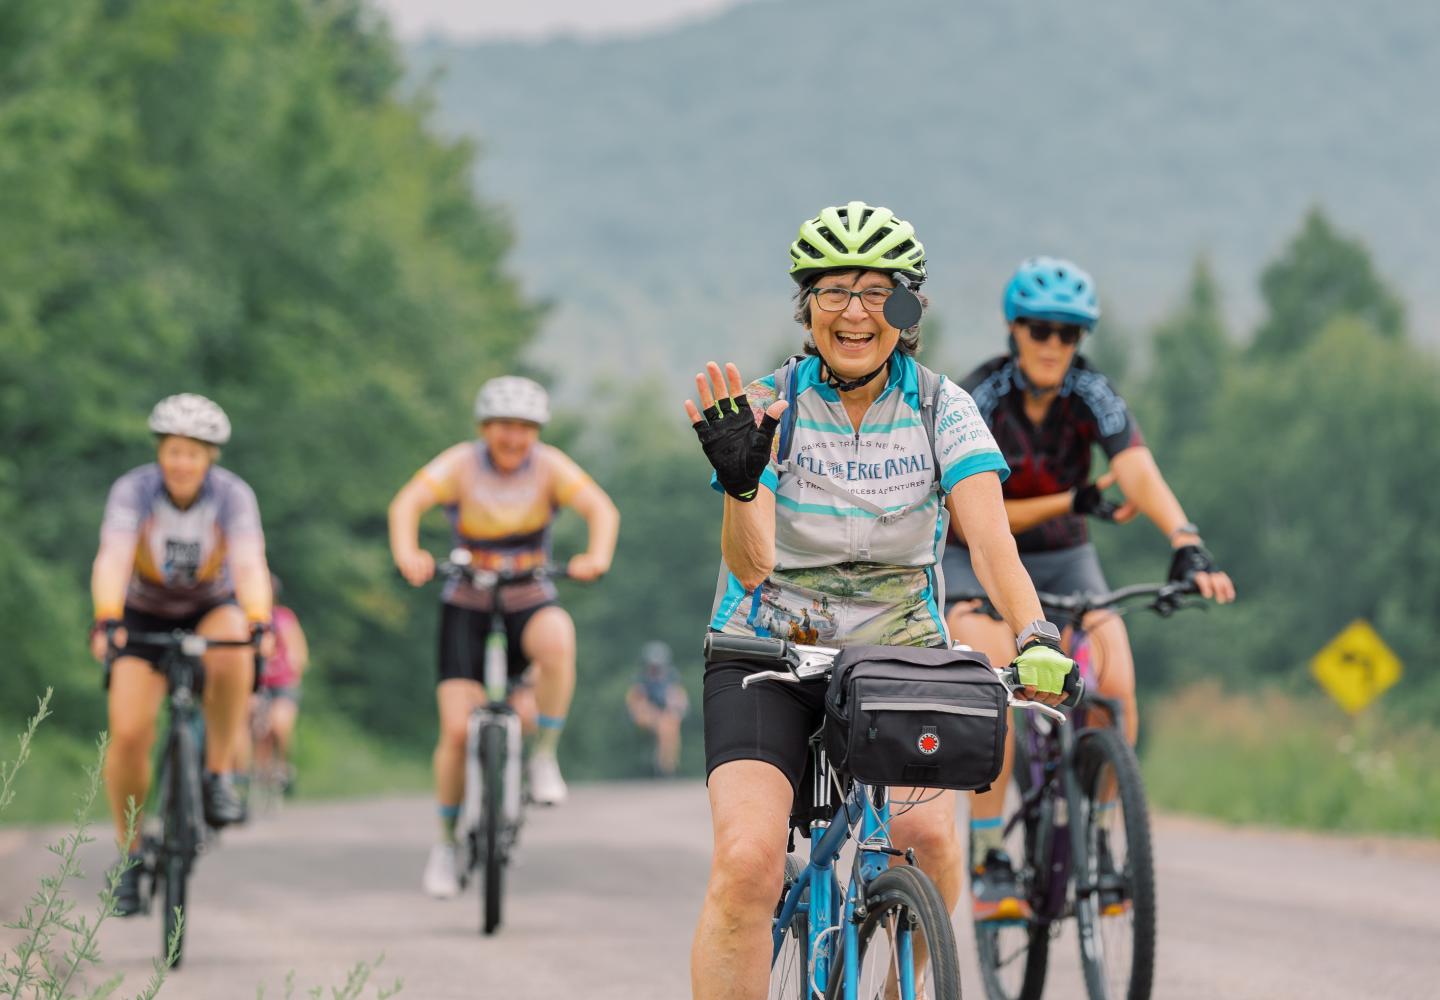 Cyclists cruise the low traffic backroads during the Adirondack Women's Weekend.